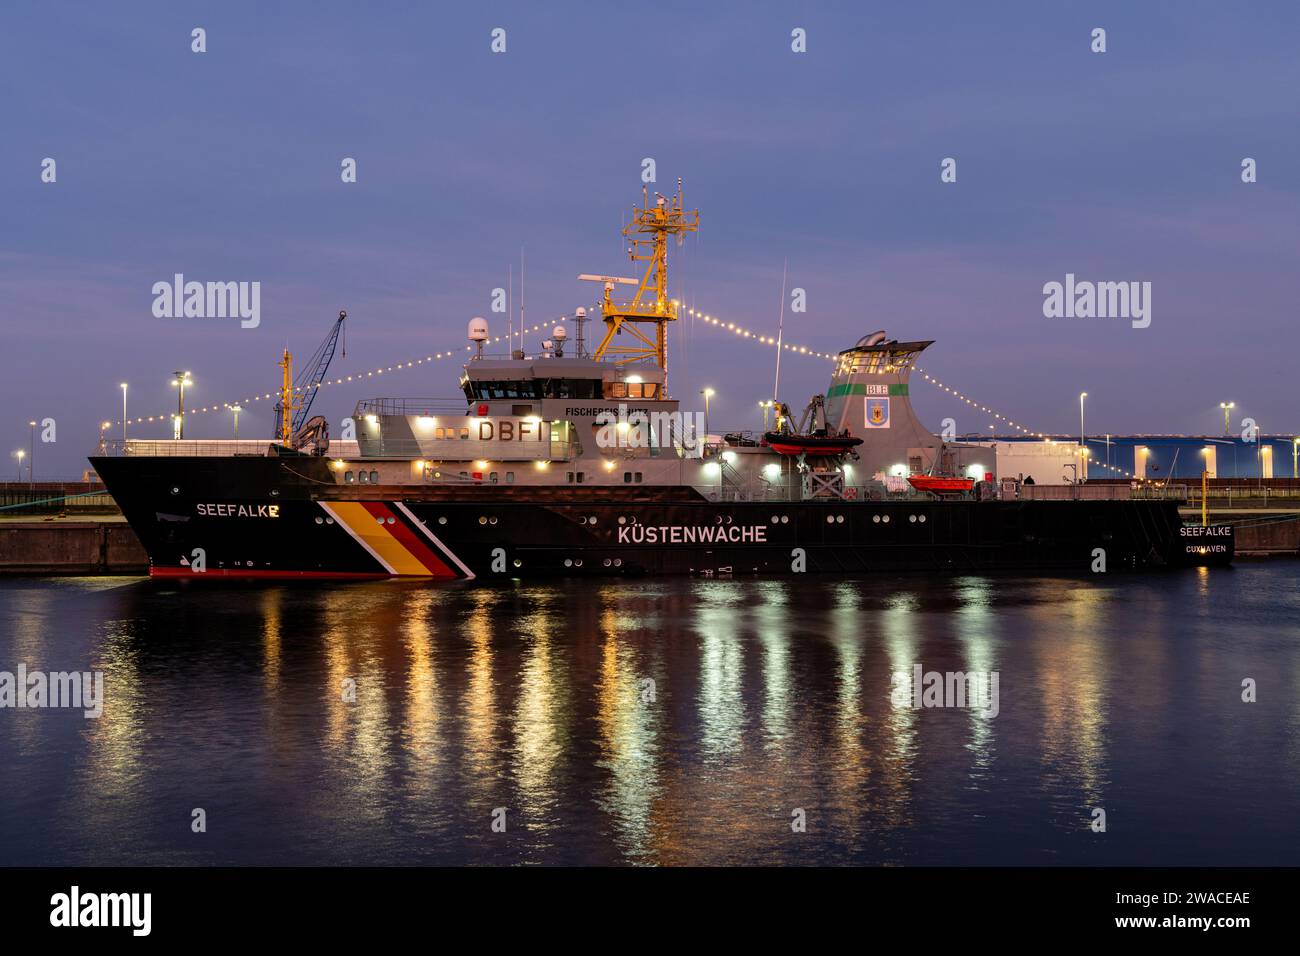 German fishery protection vessel Seefalke in the port of Cuxhaven, Germany Stock Photo